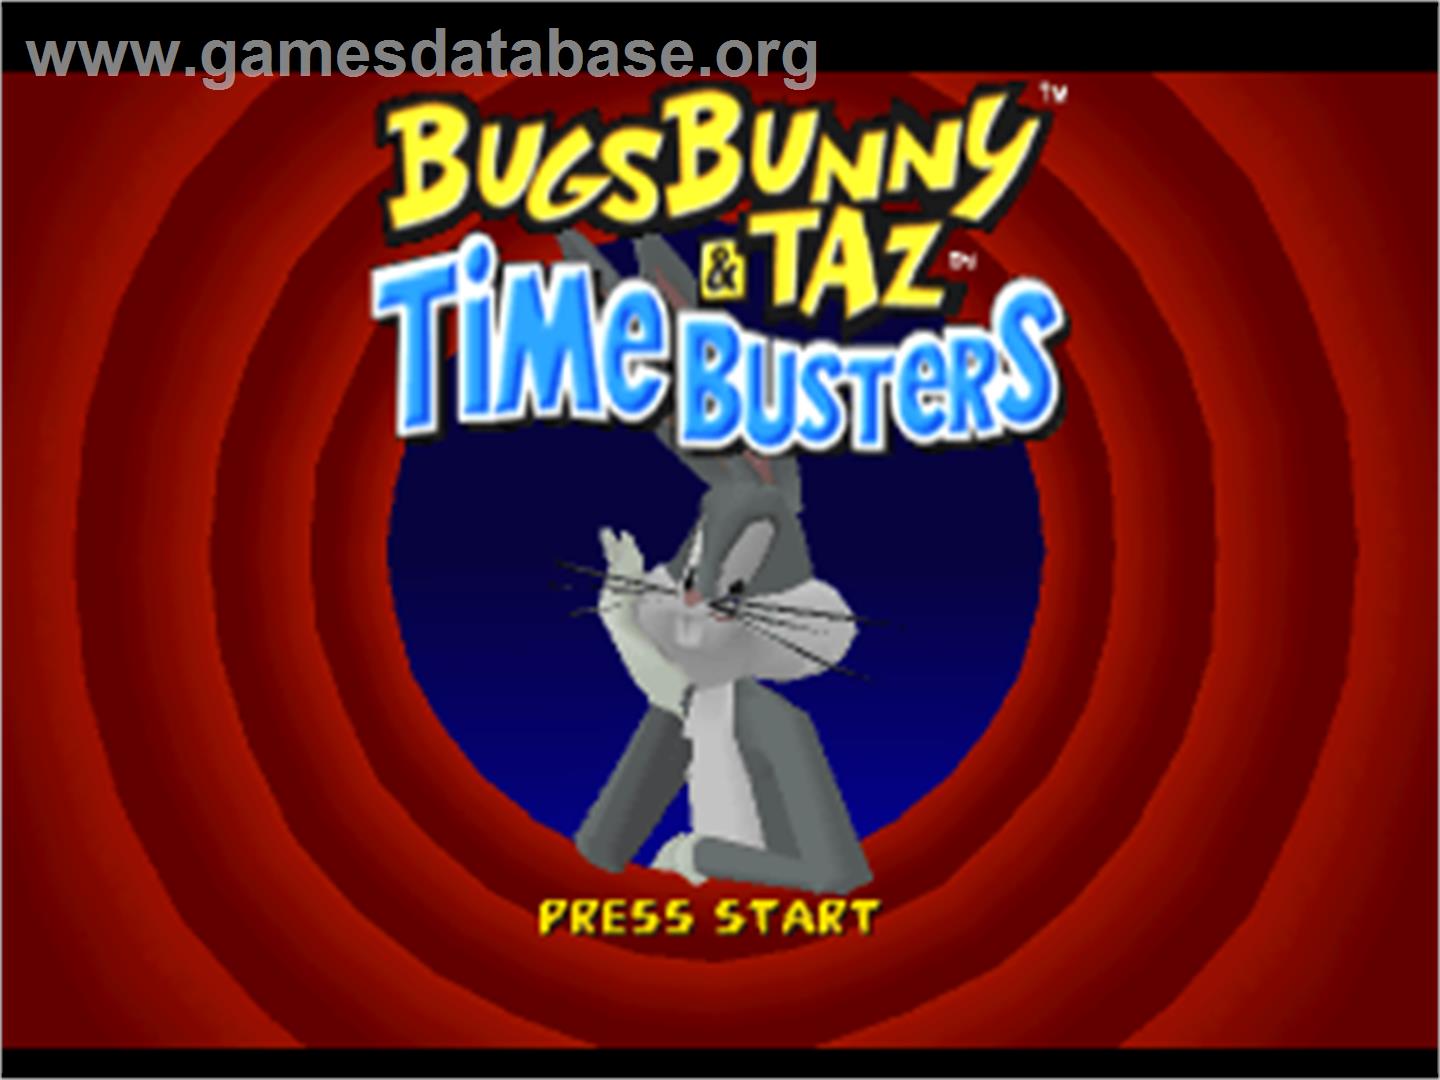 Bugs Bunny & Taz: Time Busters - Sony Playstation - Artwork - Title Screen